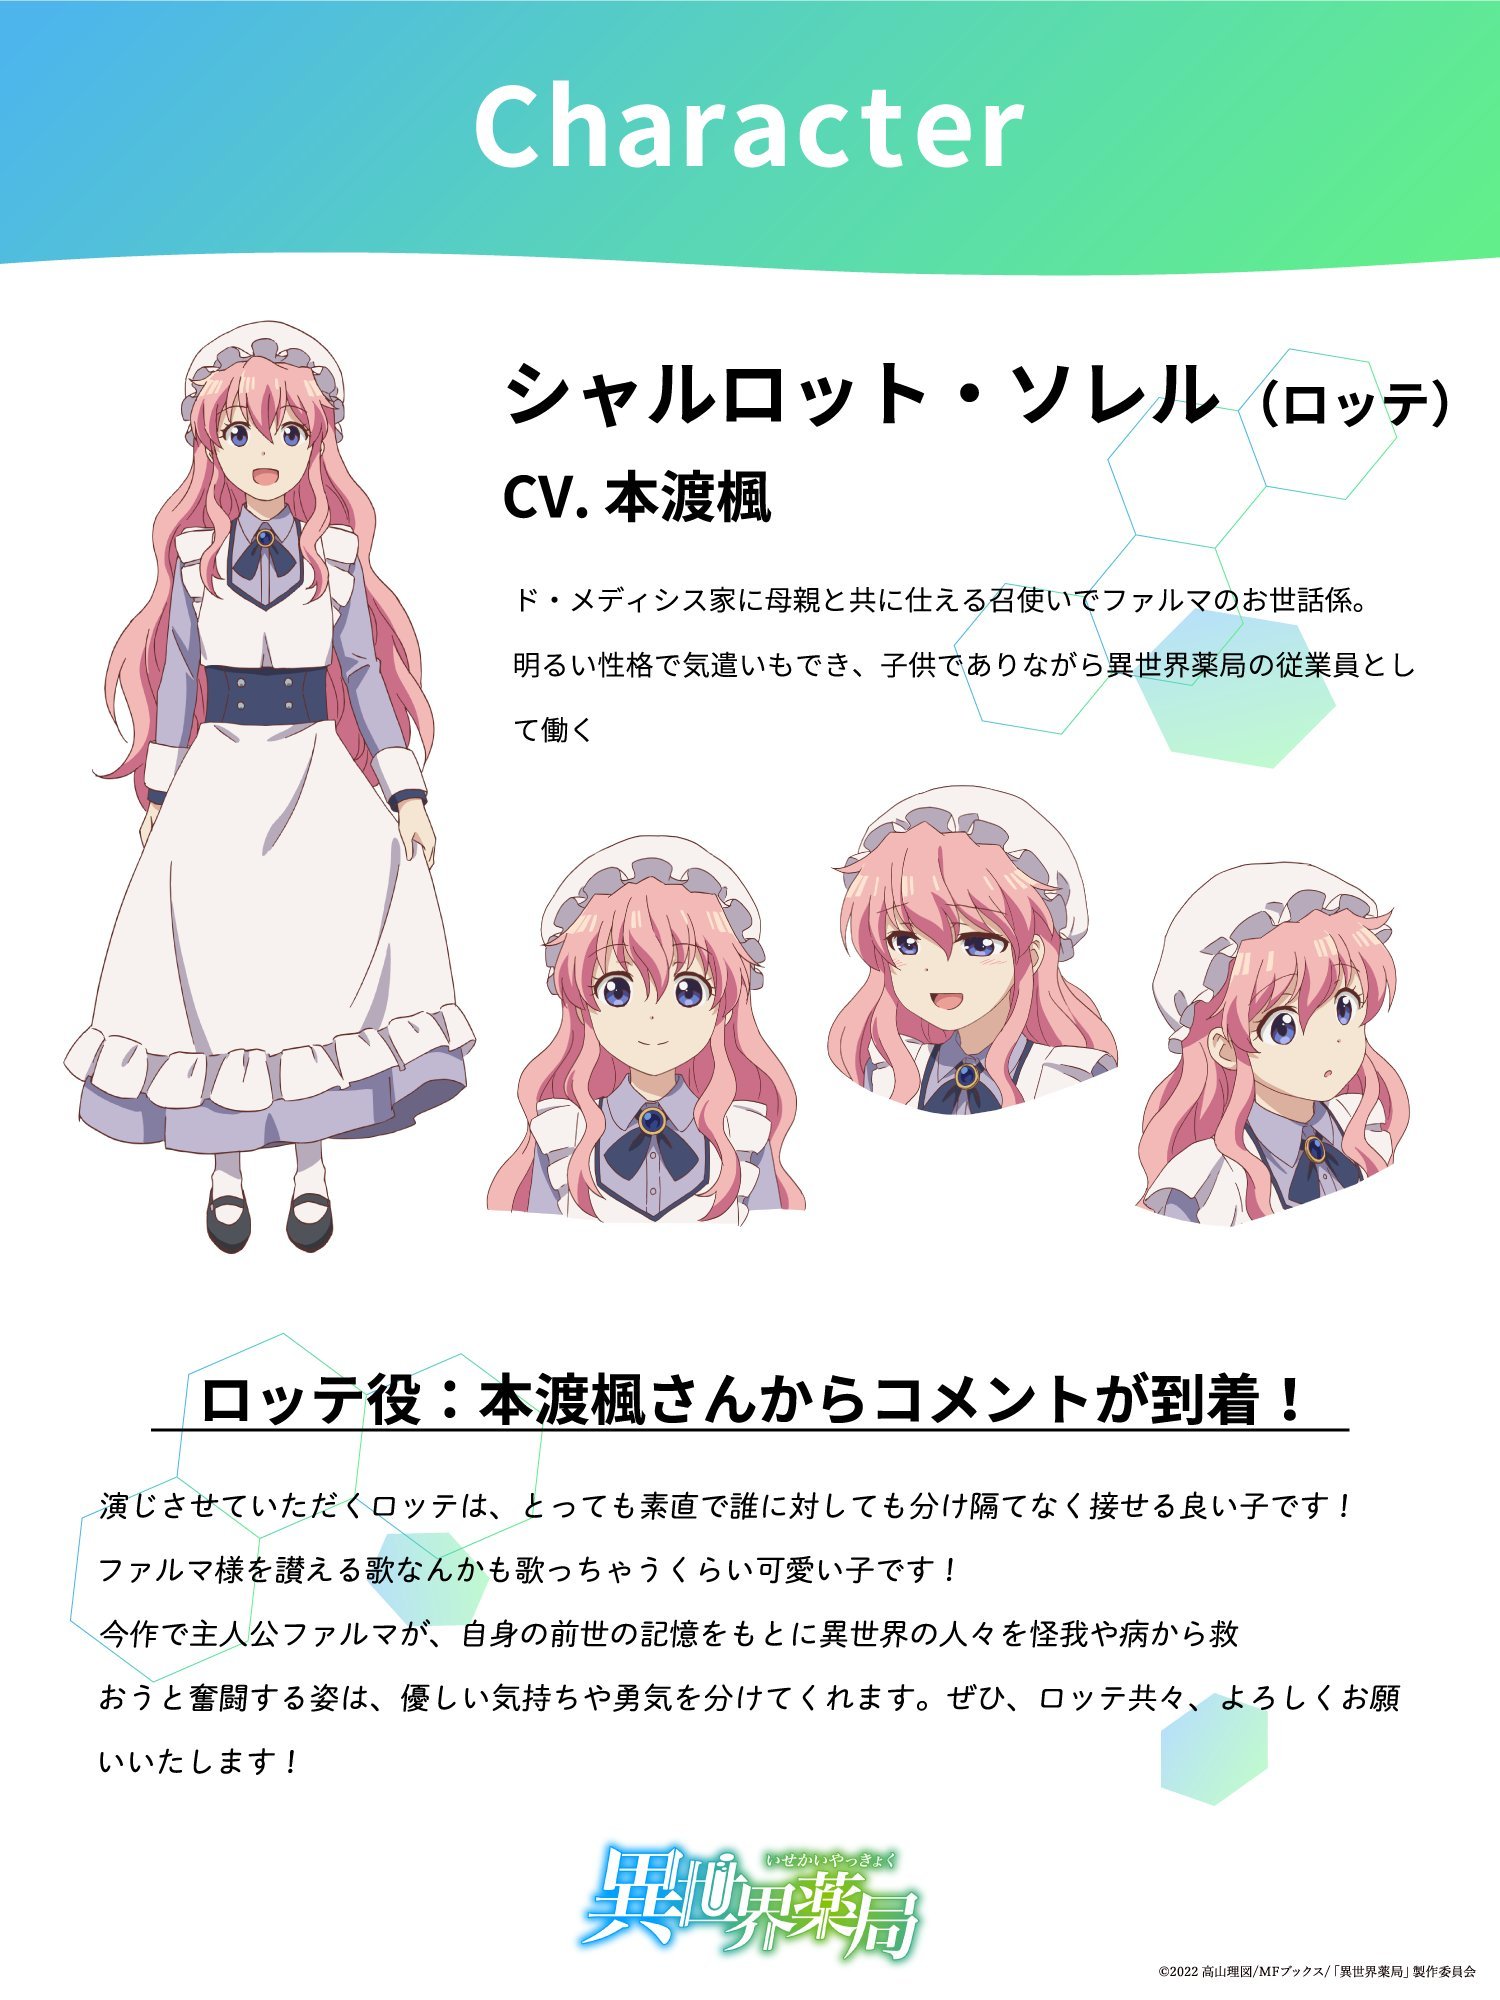 A.I.R (Anime Intelligence (and) Research) on X: Isekai Yakkyoku TV anime  additional cast: - Eléonore Bonnefoi (CV: Reina Ueda) - Charlotte Soller  (CV: Kaede Hondo) Broadcasting is scheduled for this year. (Studio